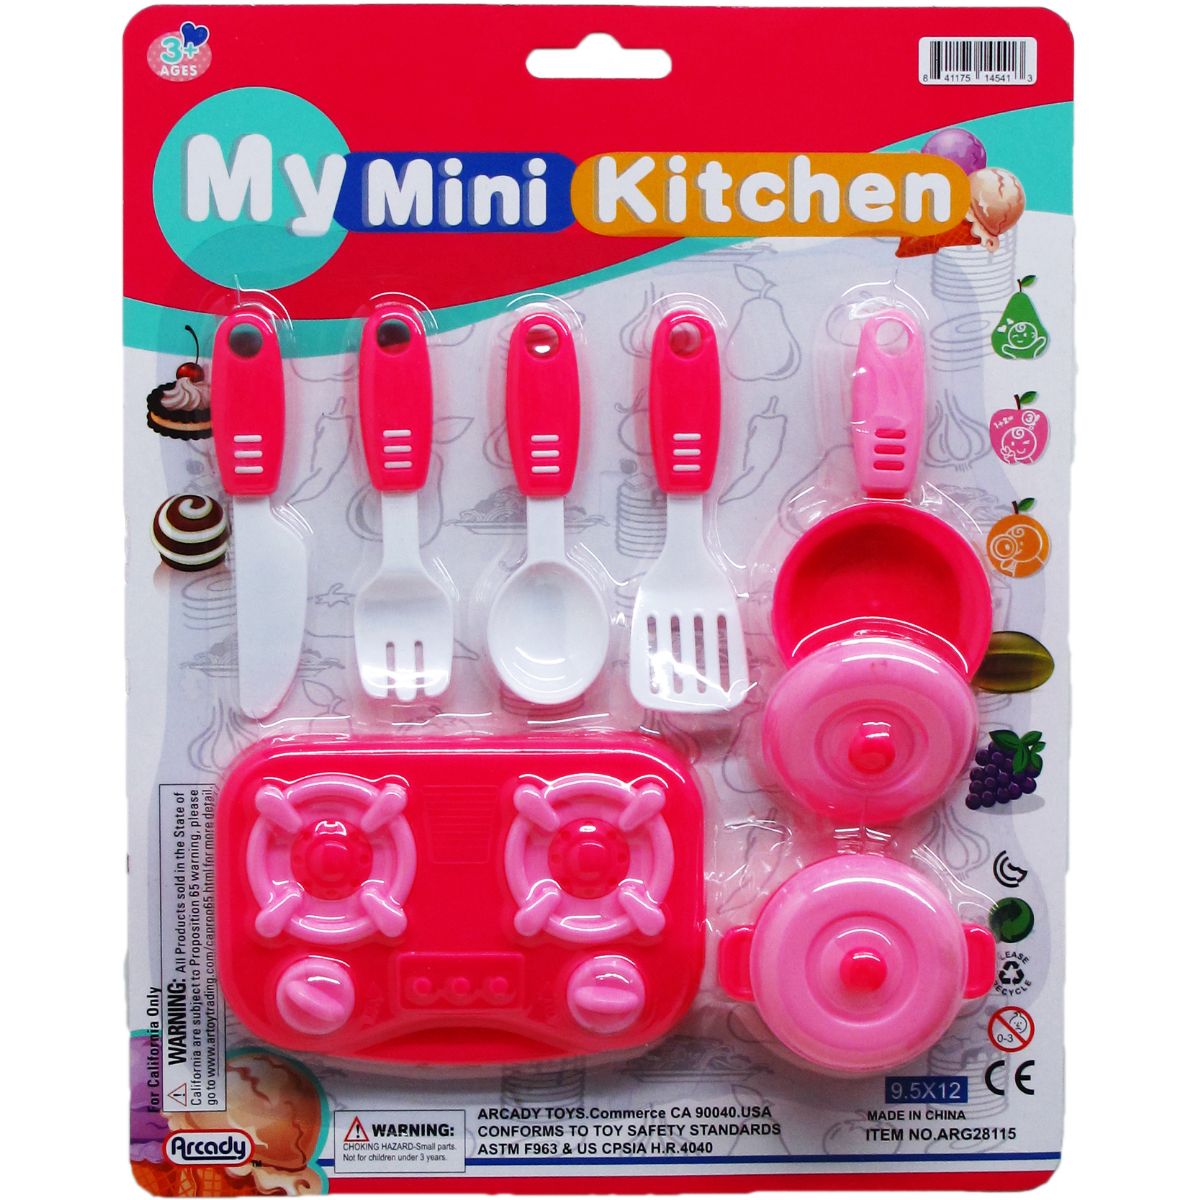 48 Pieces Kitchen Play Set On Blister Card, 2 Assrt Styles - Toy Sets